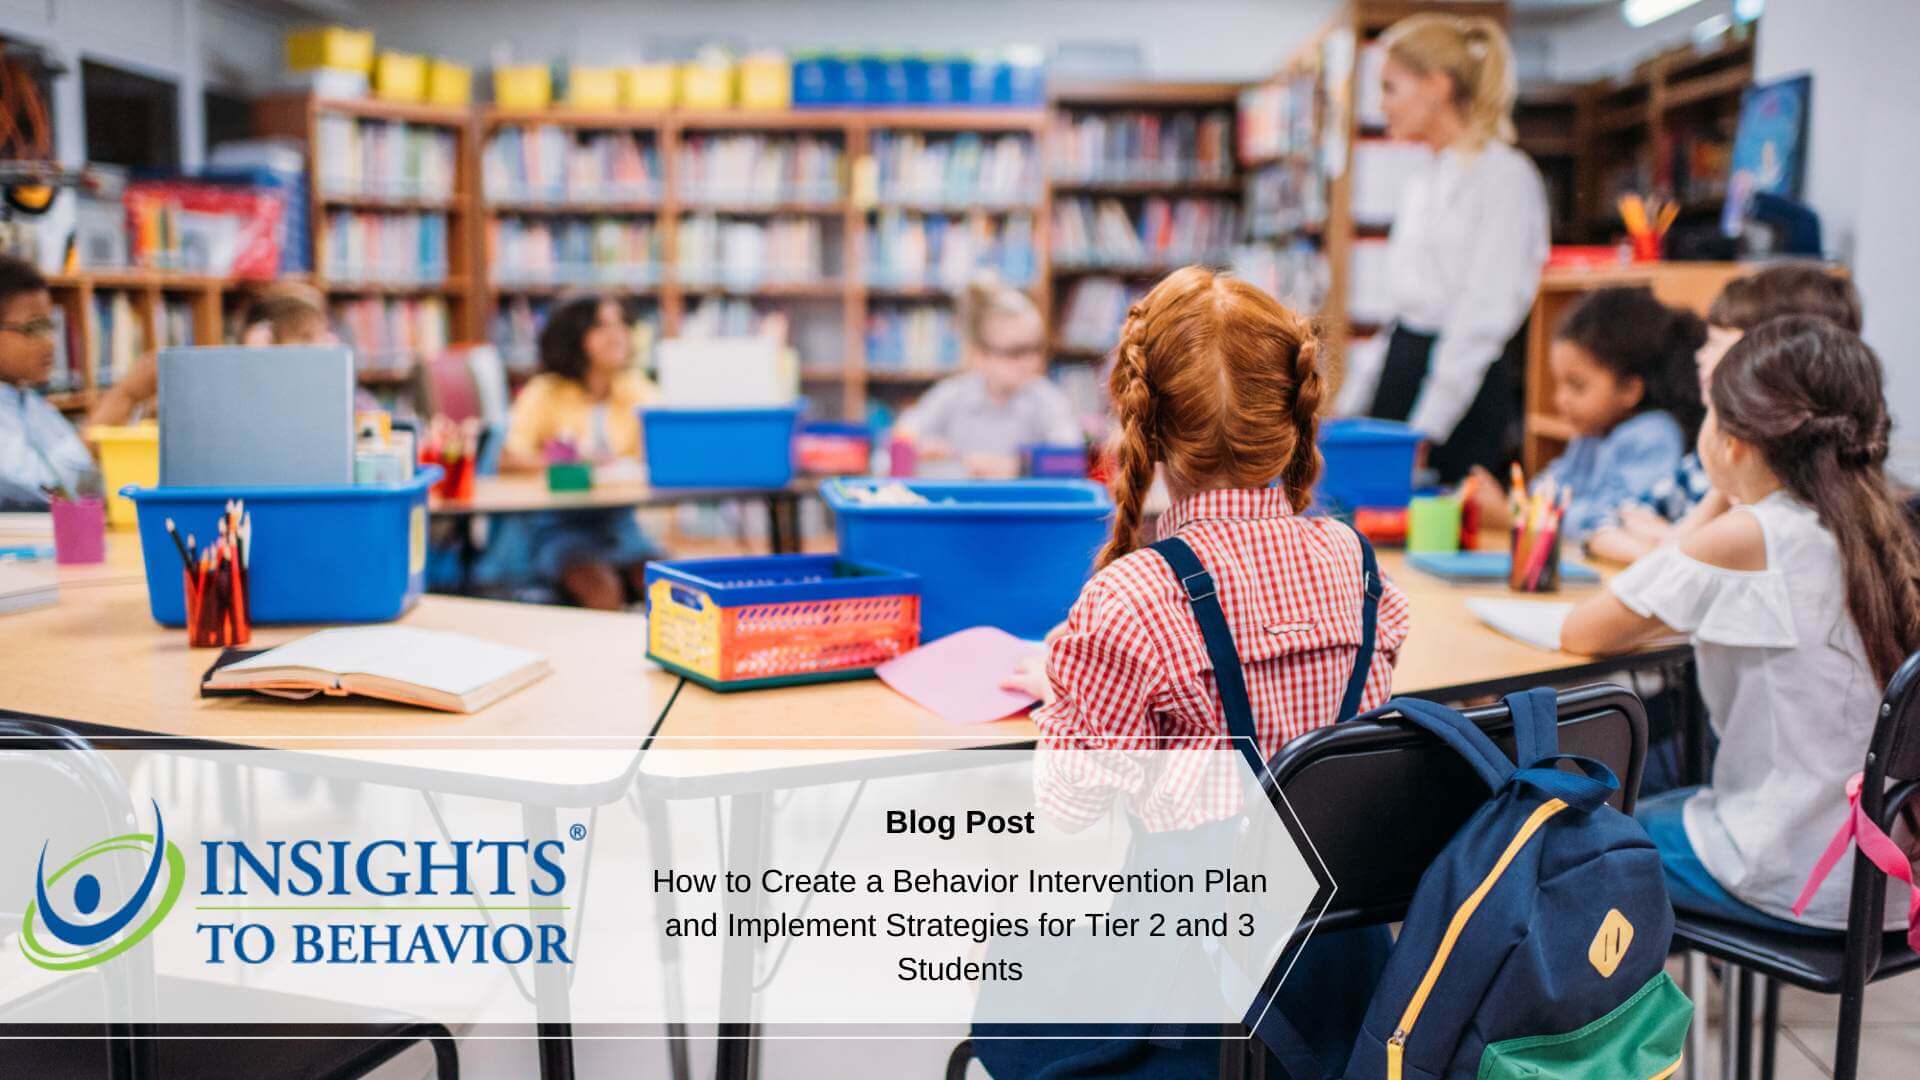 How to Create a Behavior Intervention Plan and Implement Strategies for Tier 2 and 3 Students